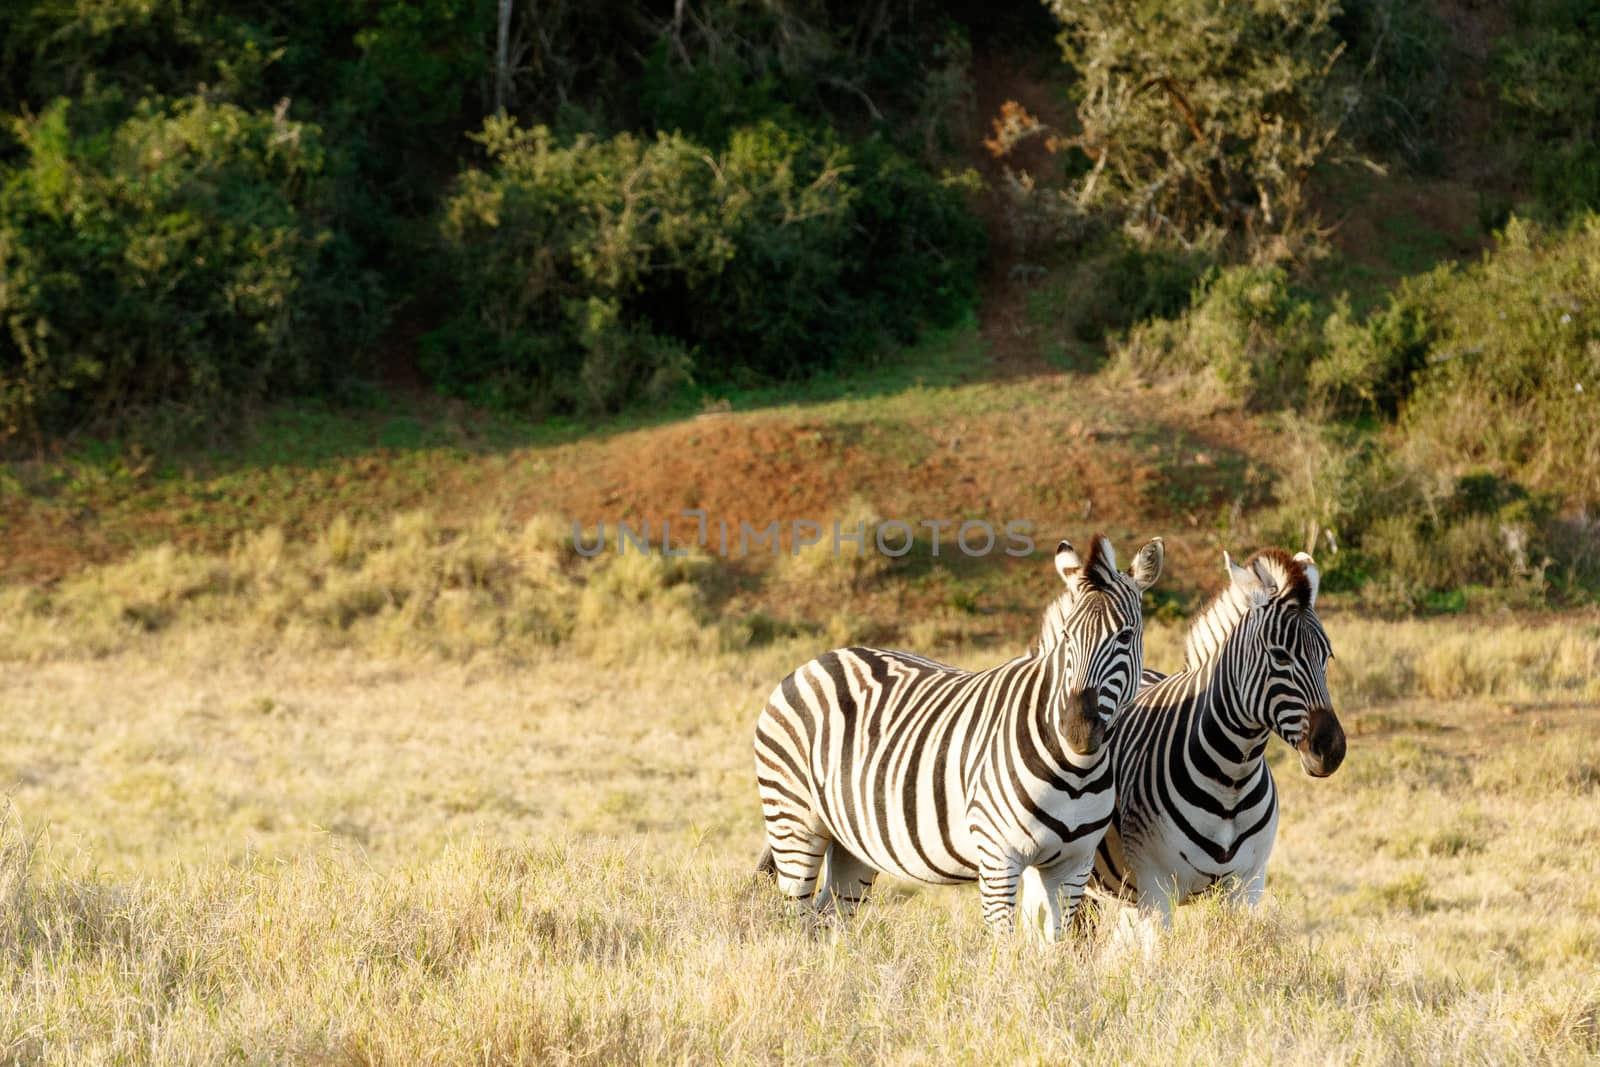 Two Zebras standing in a field of long grass.